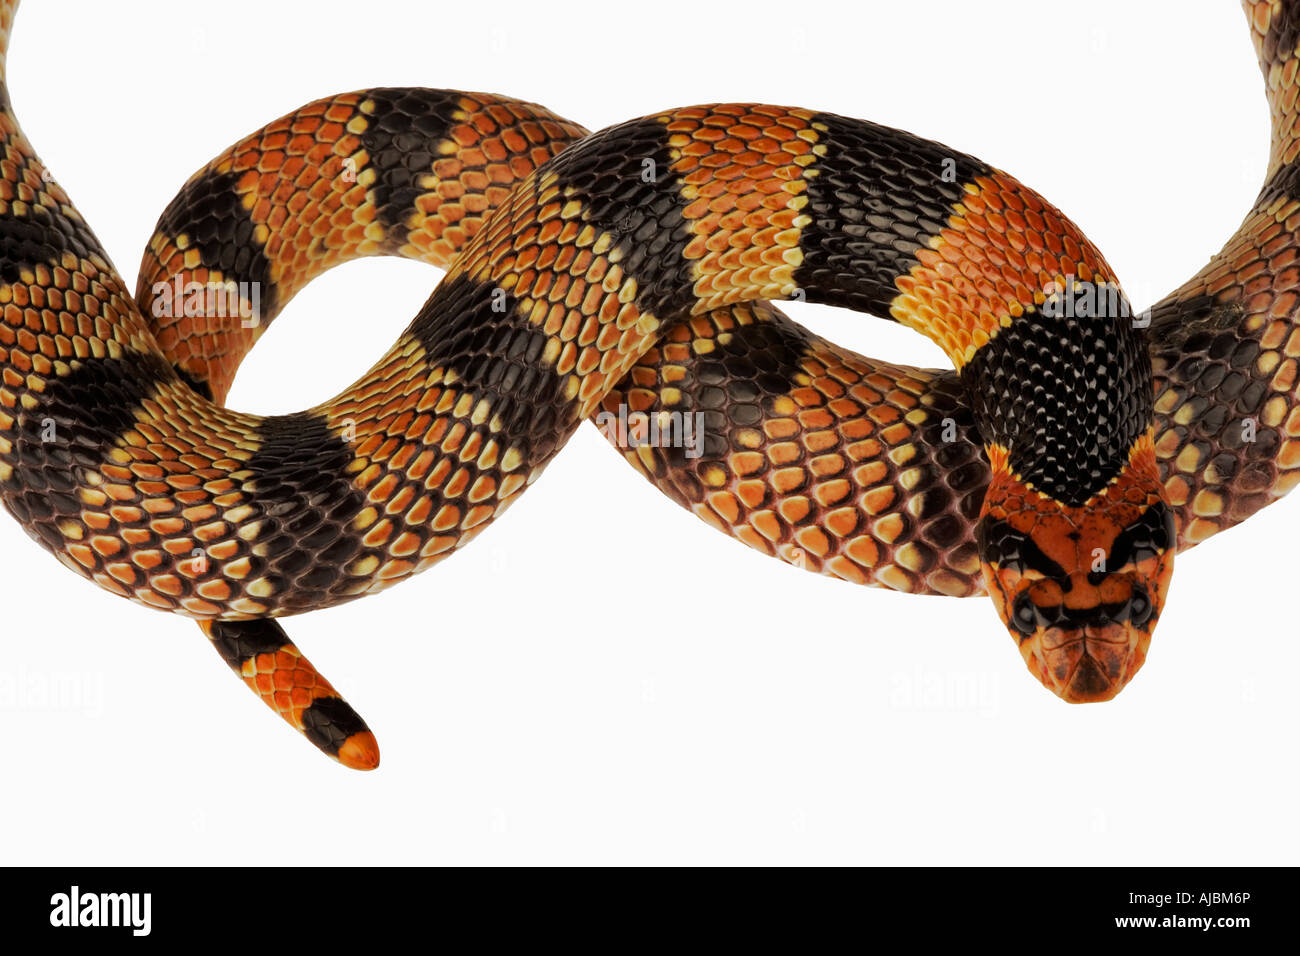 Portrait of the Head and Tail of a Cape Coral Snake (Aspidelaps lubricus lubricus) Stock Photo